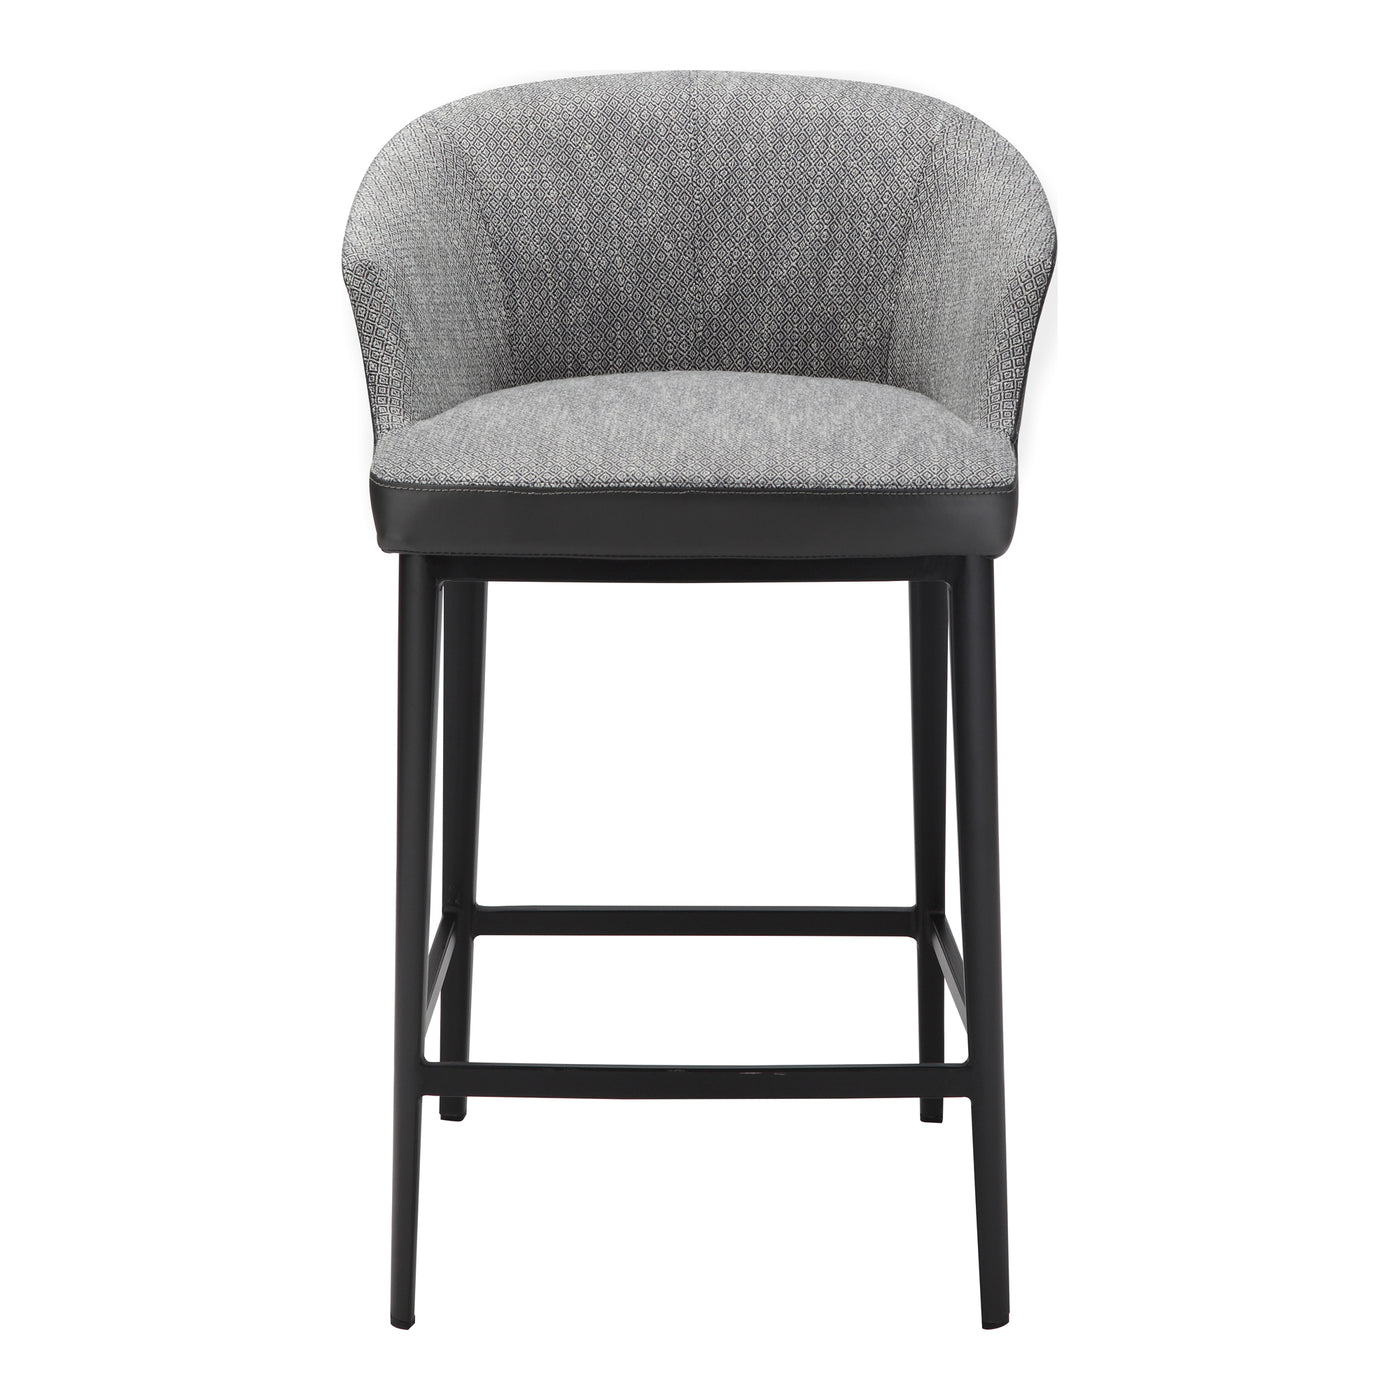 The Beckett counter stool features a durable upholstered seat mix with a sleek, solid steel base giving the chair a slim a...